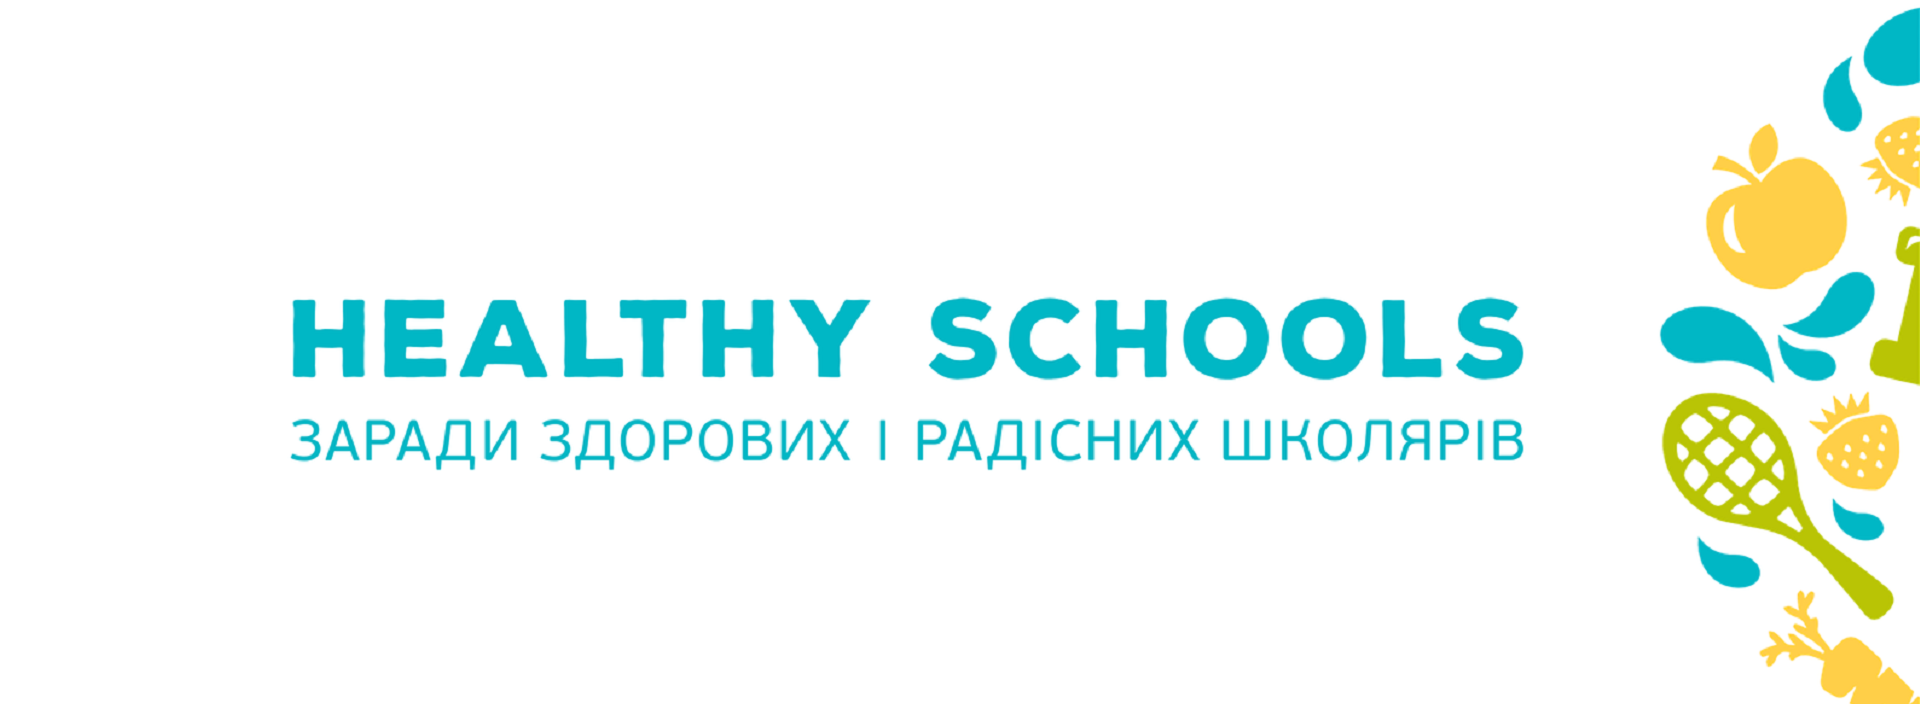 Ukrainian Schools Received Over UAH 1,110,000 for STEM Equipment and More Than 250,000 Students Joined the Healthy Schools Project